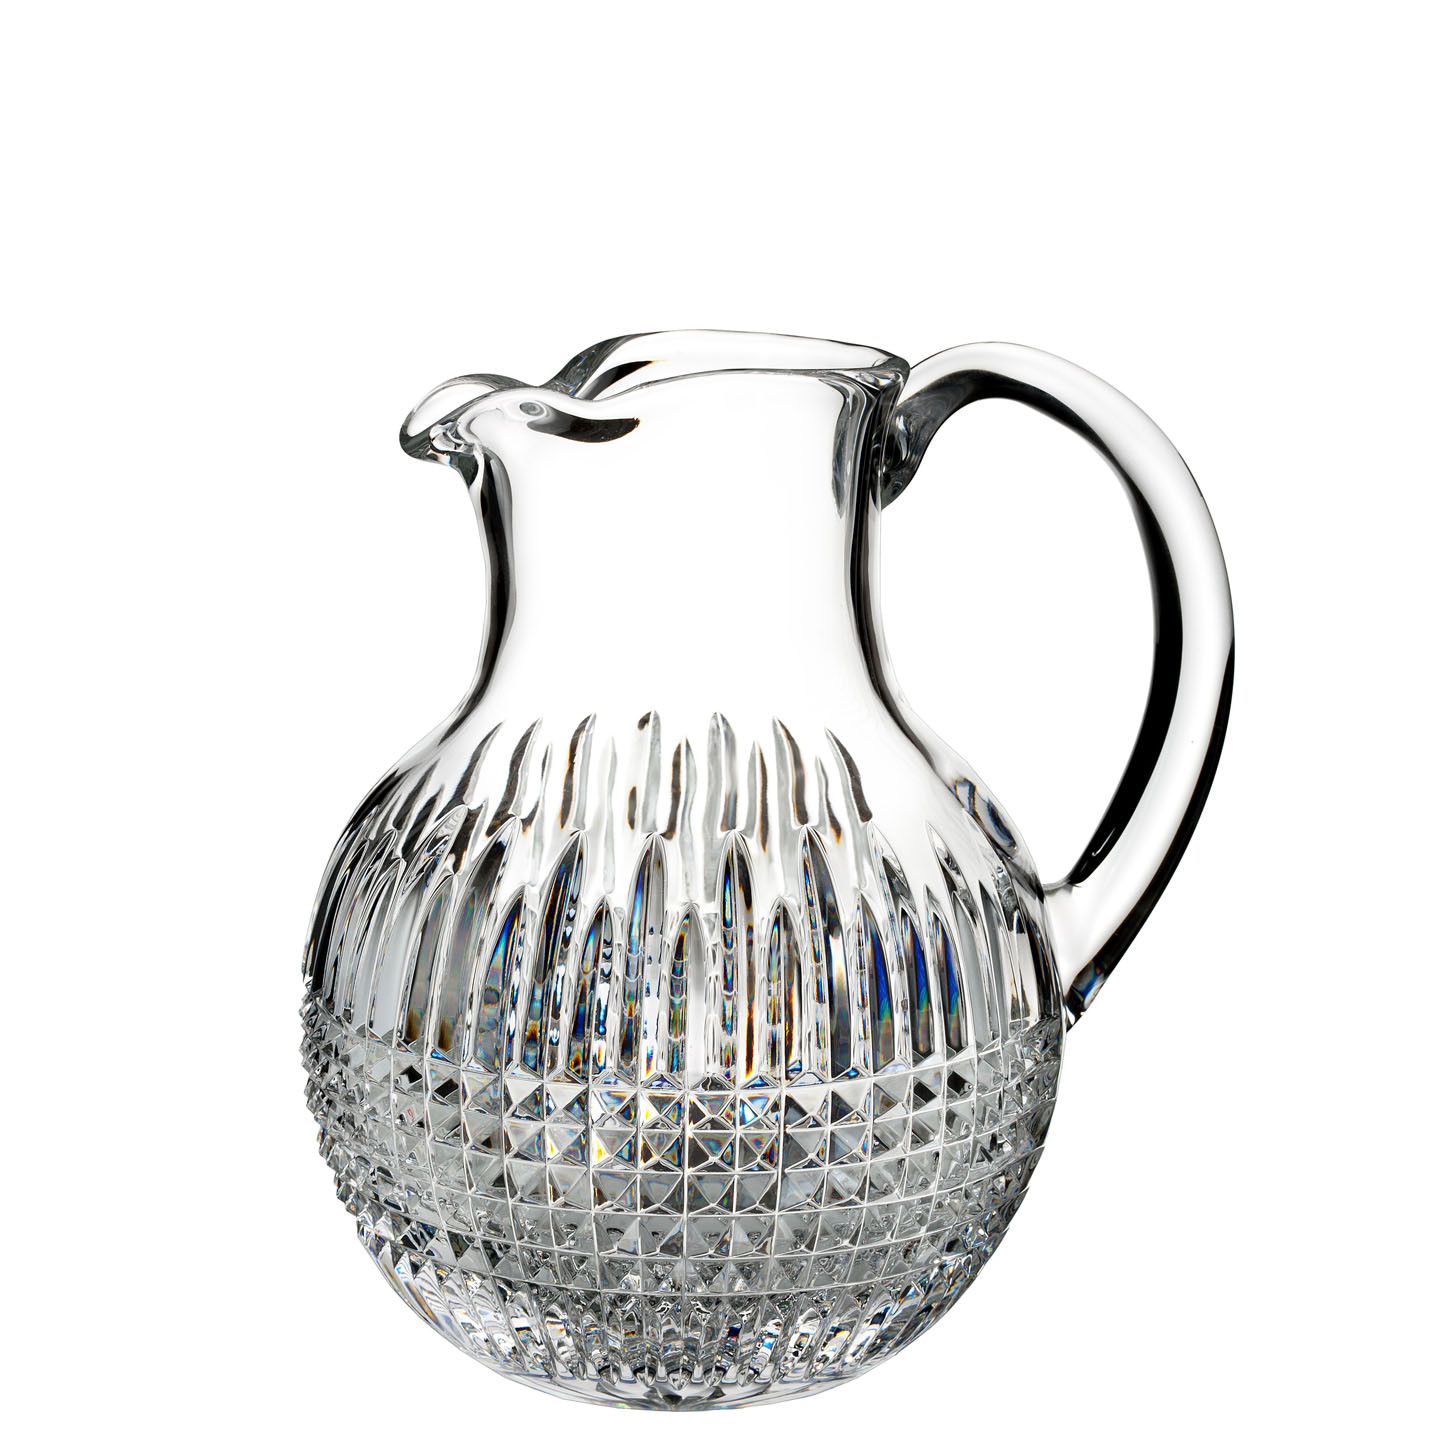 29 Great Waterford Sugar Bud Vase 2024 free download waterford sugar bud vase of housewarming gifts new home gifts waterforda crystal within lismore diamond encore pitcher